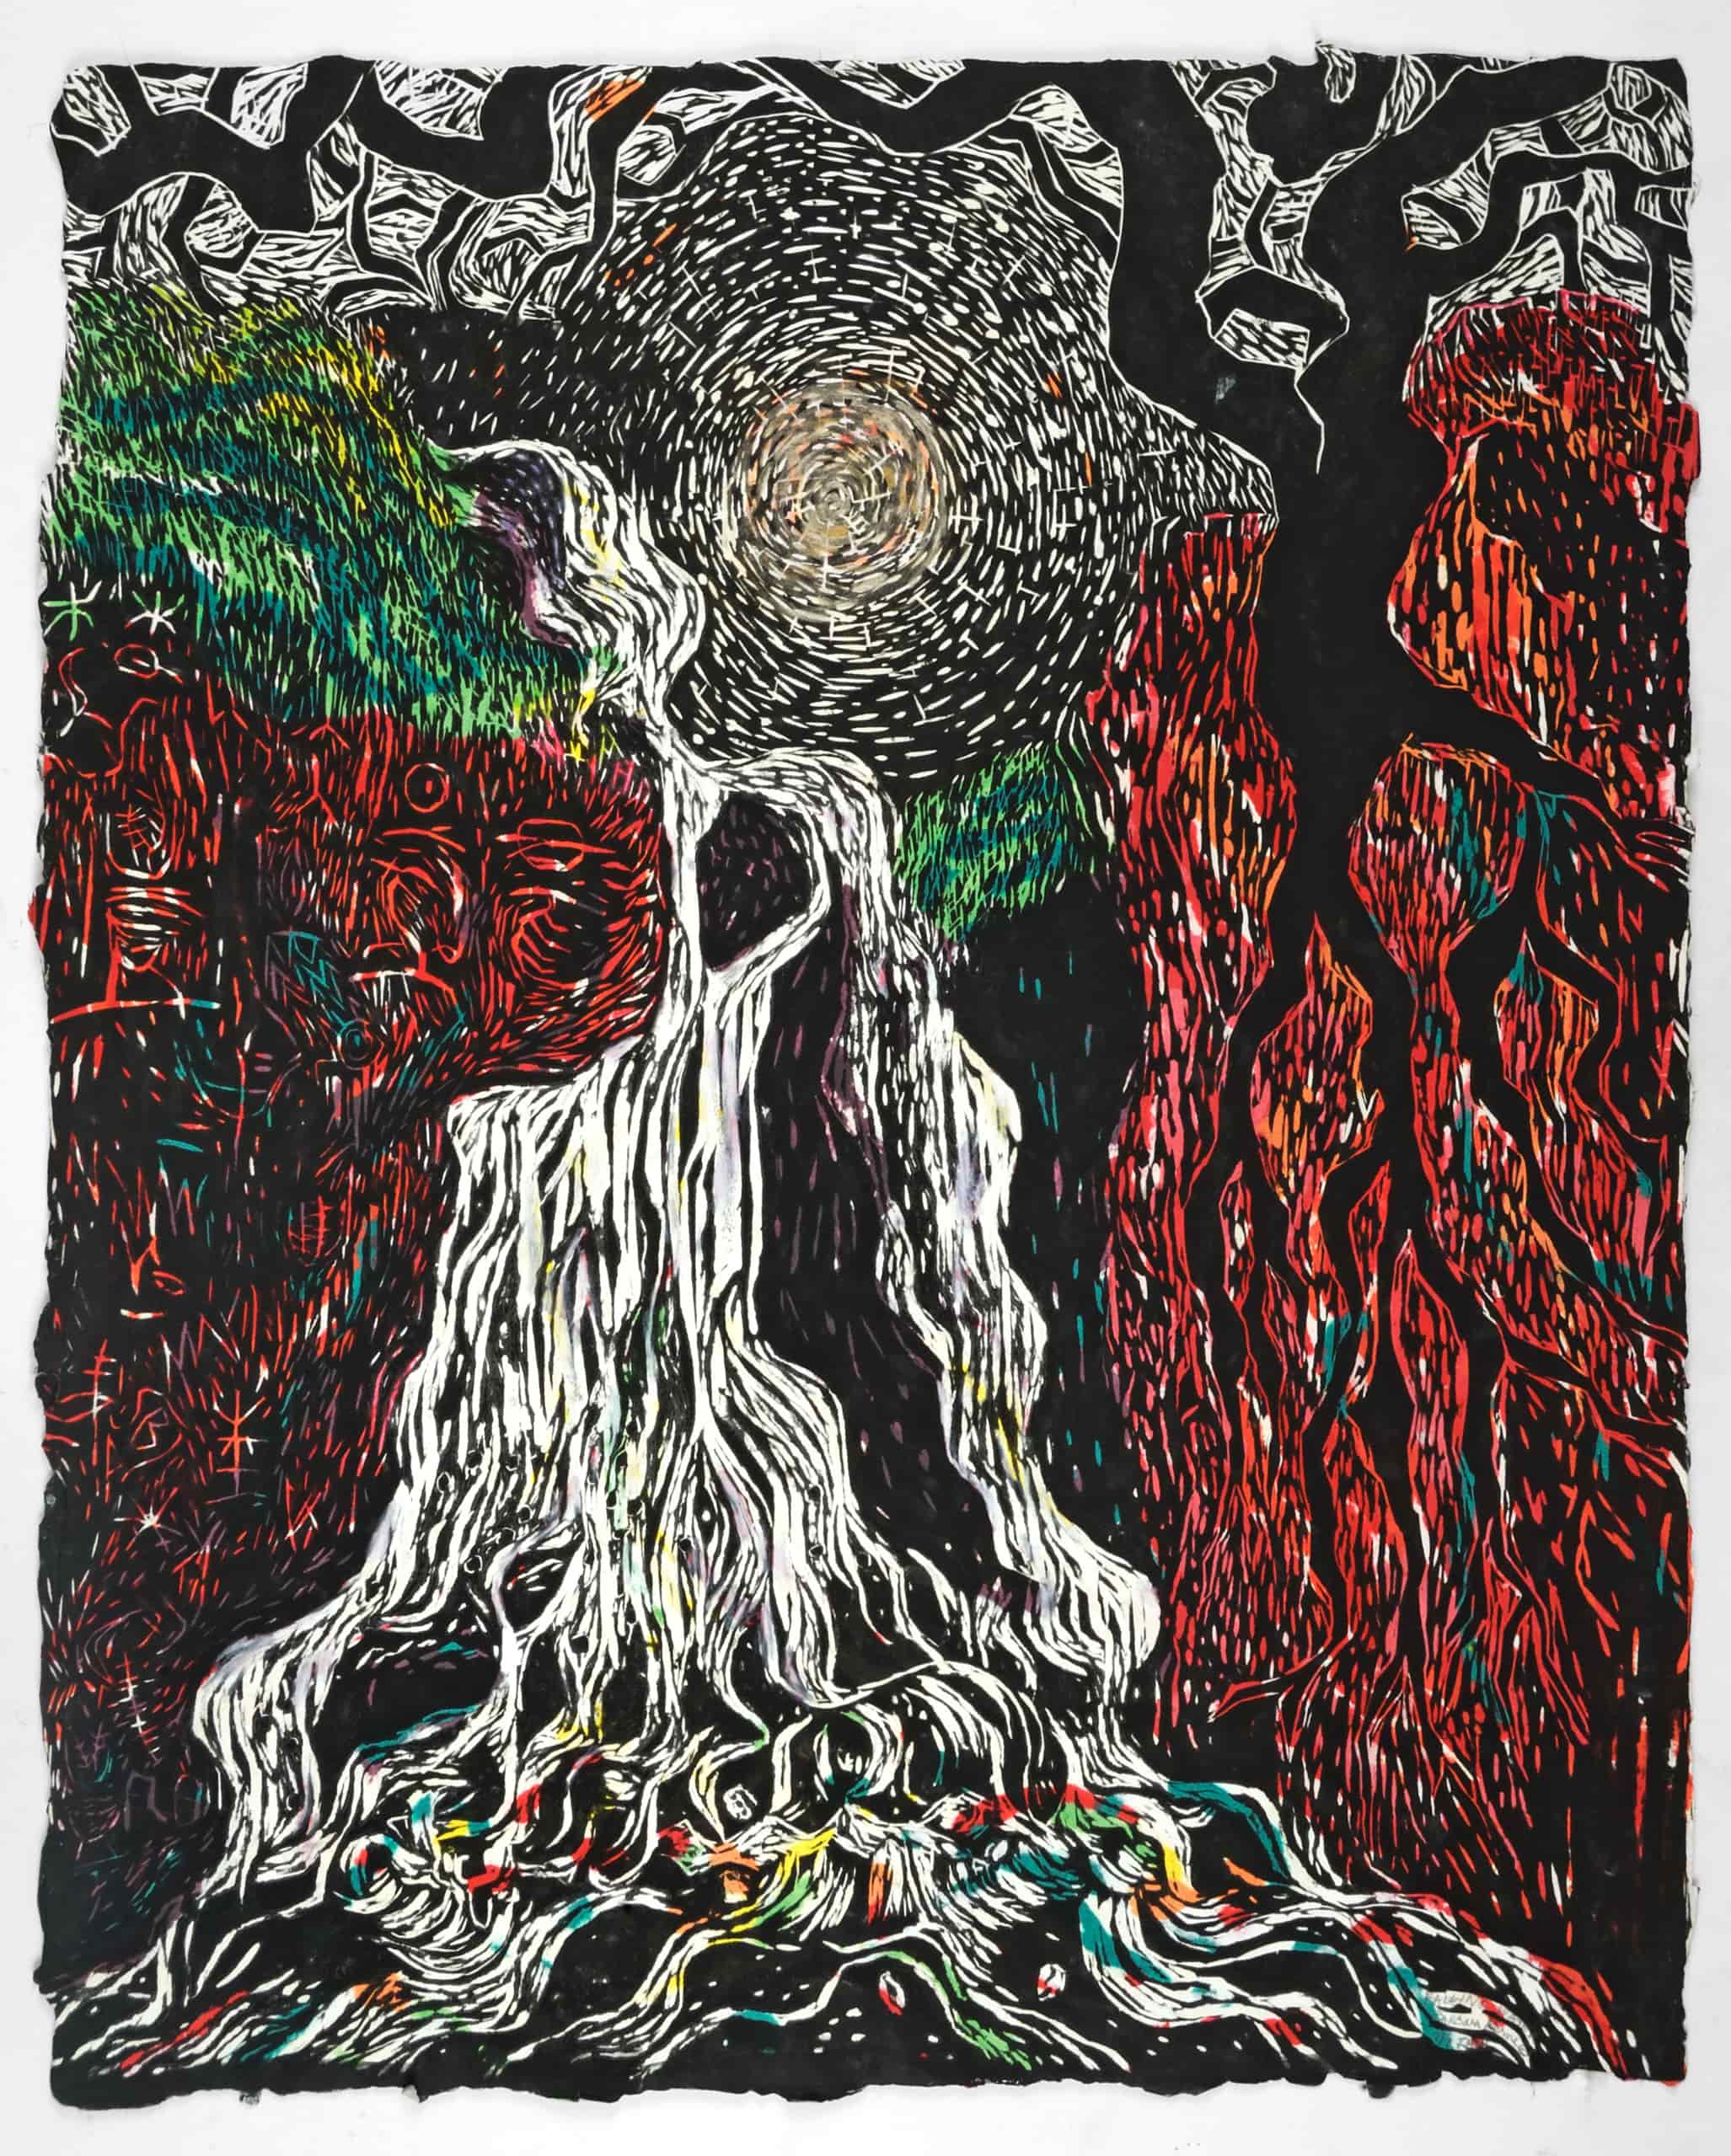 Barbara Kerne, Falling Water, 2014.  Woodcut, artist made paper, 31 x 24 inches.